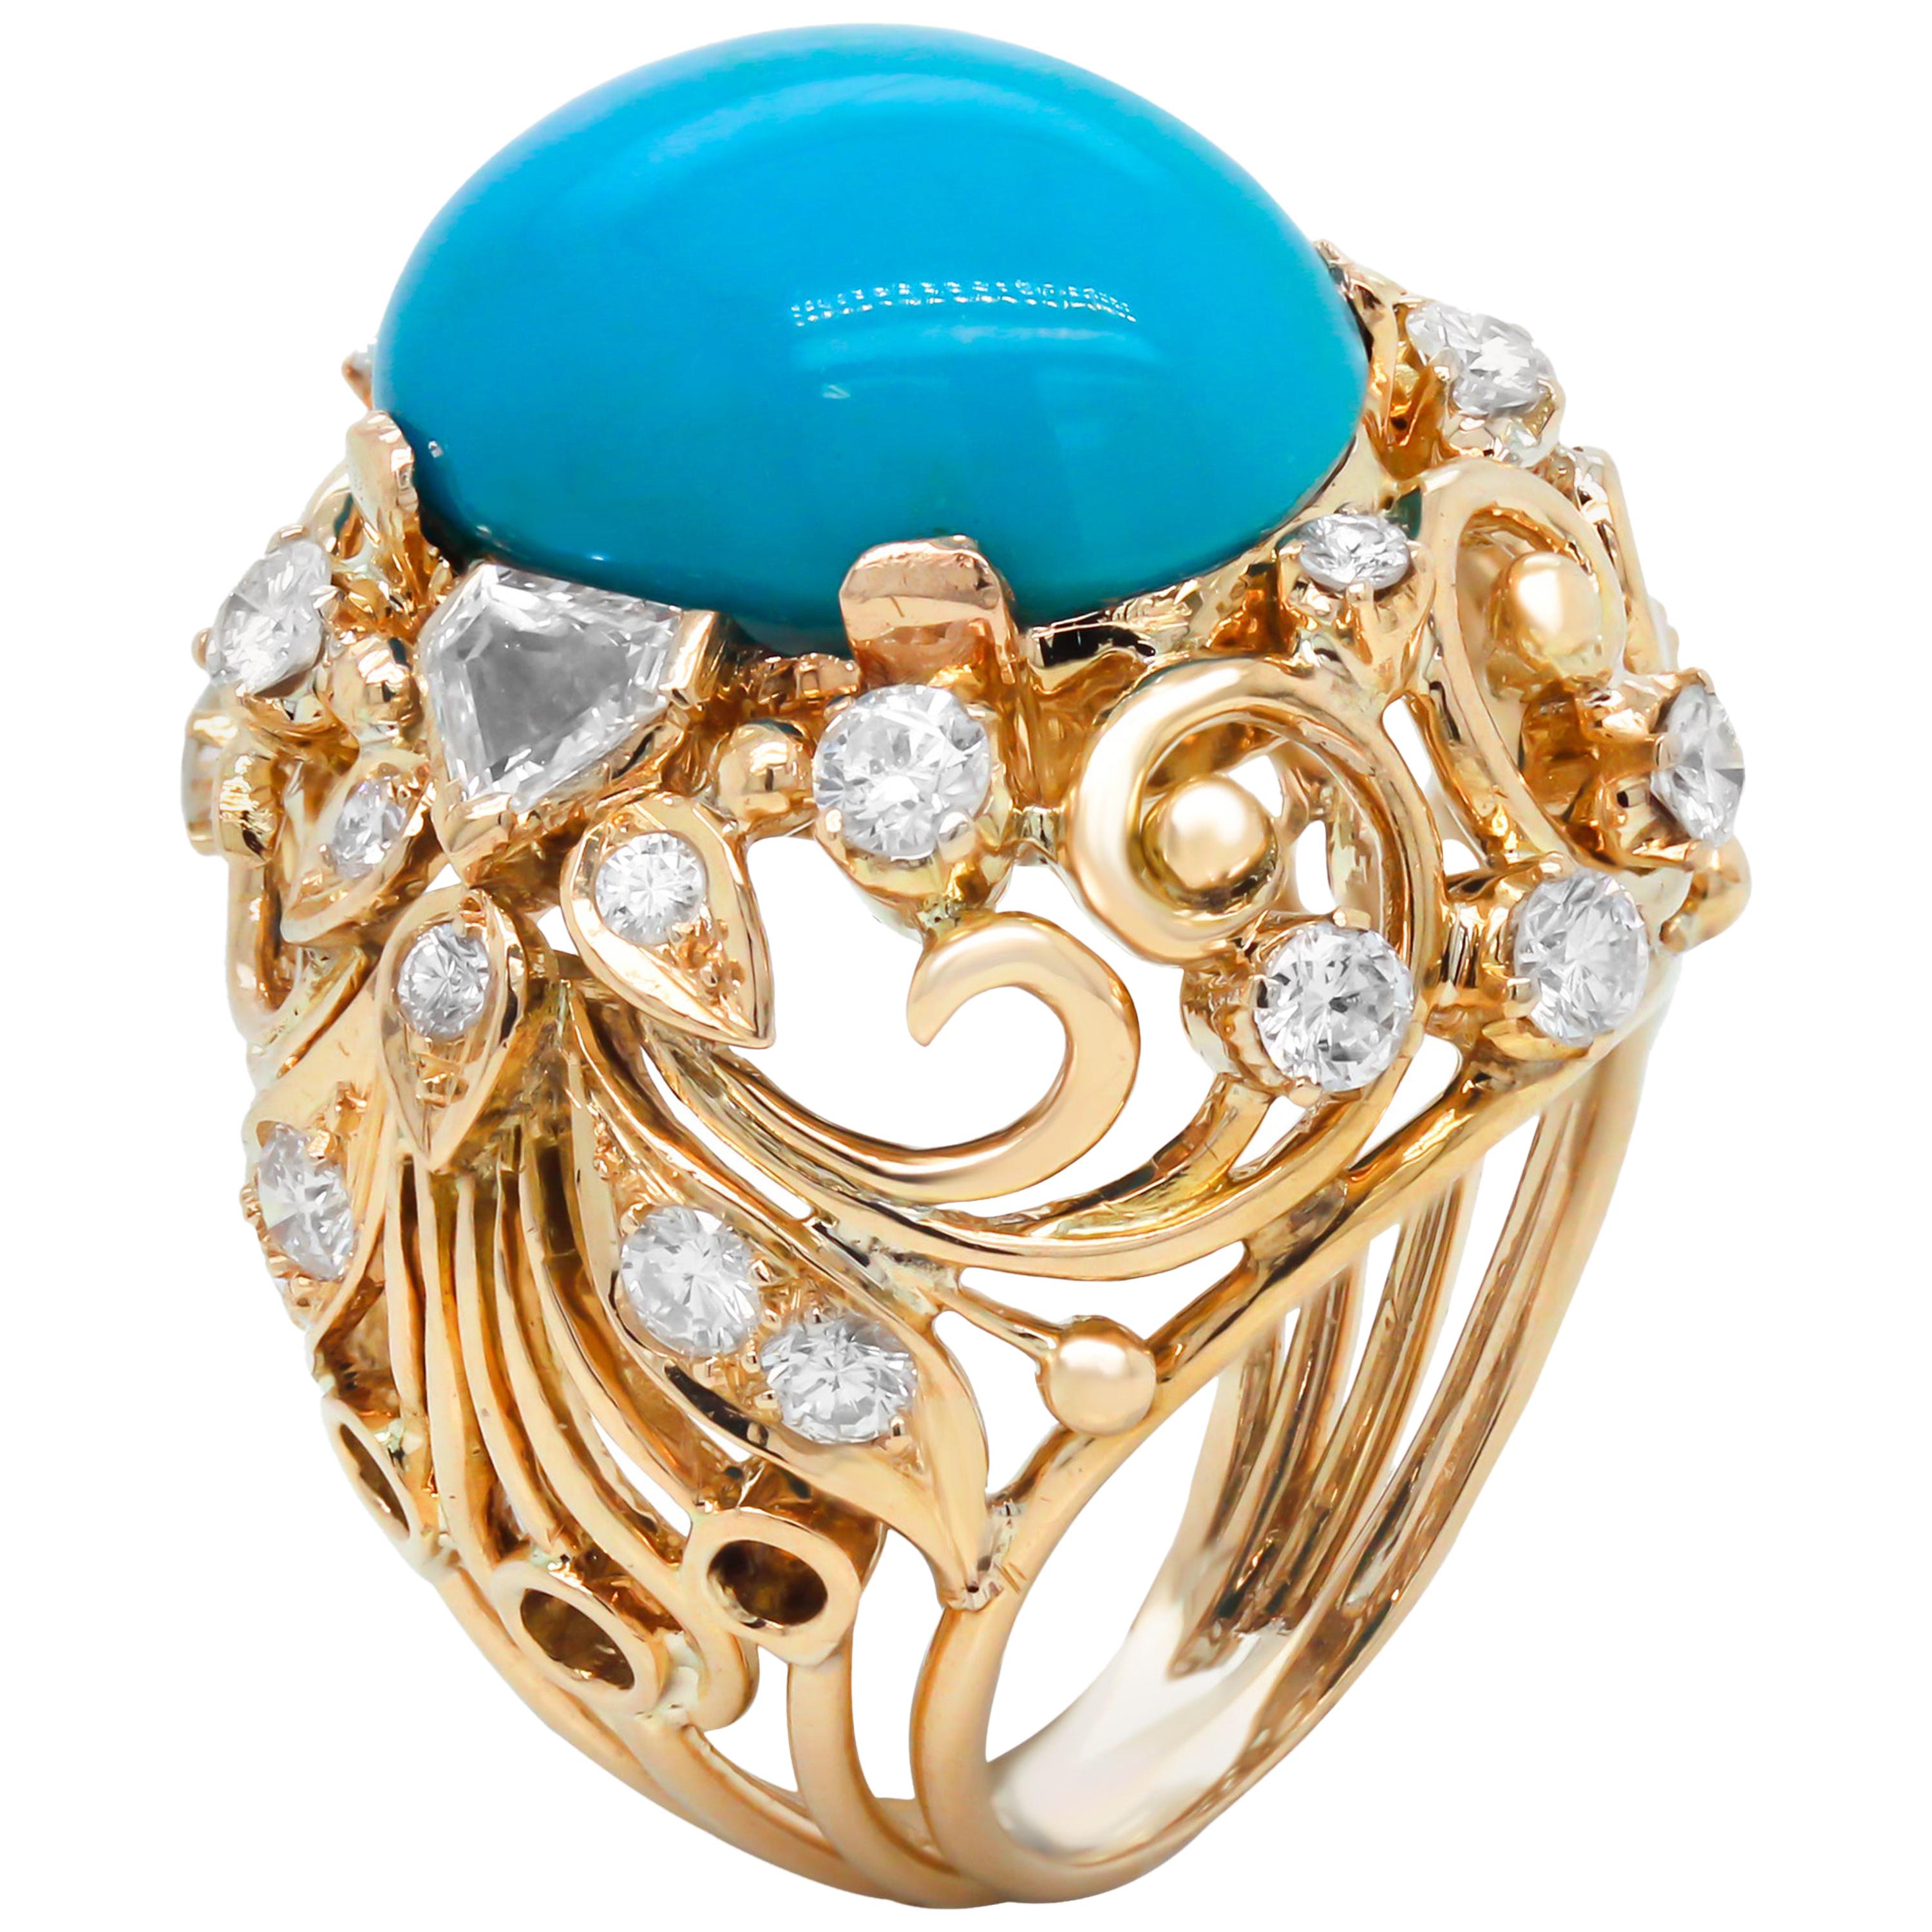 Yellow Gold and Diamond Dome Ring with Sleeping Beauty Turquoise Center